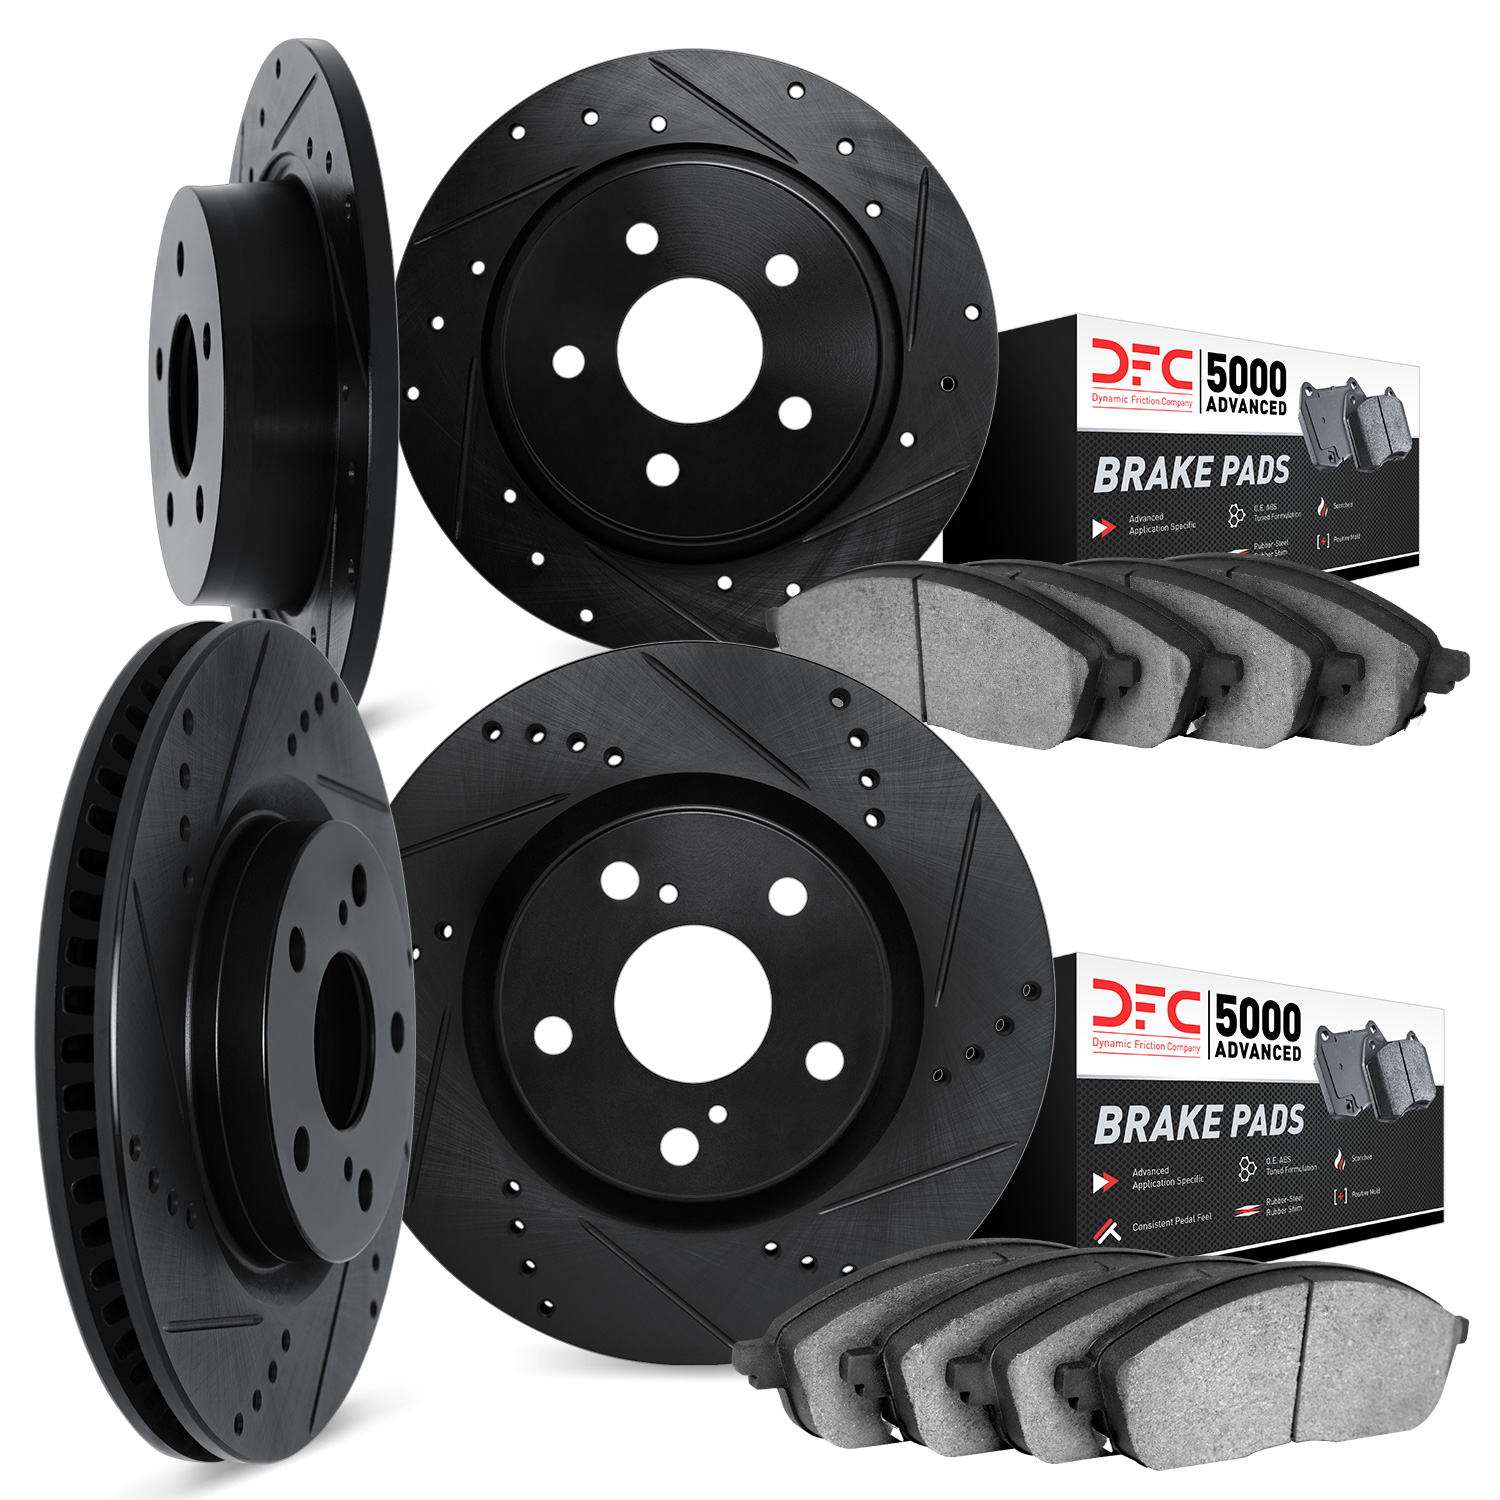 8504-76133 Drilled/Slotted Brake Rotors w/5000 Advanced Brake Pads Kit [Black], 2000-2001 Lexus/Toyota/Scion, Position: Front an